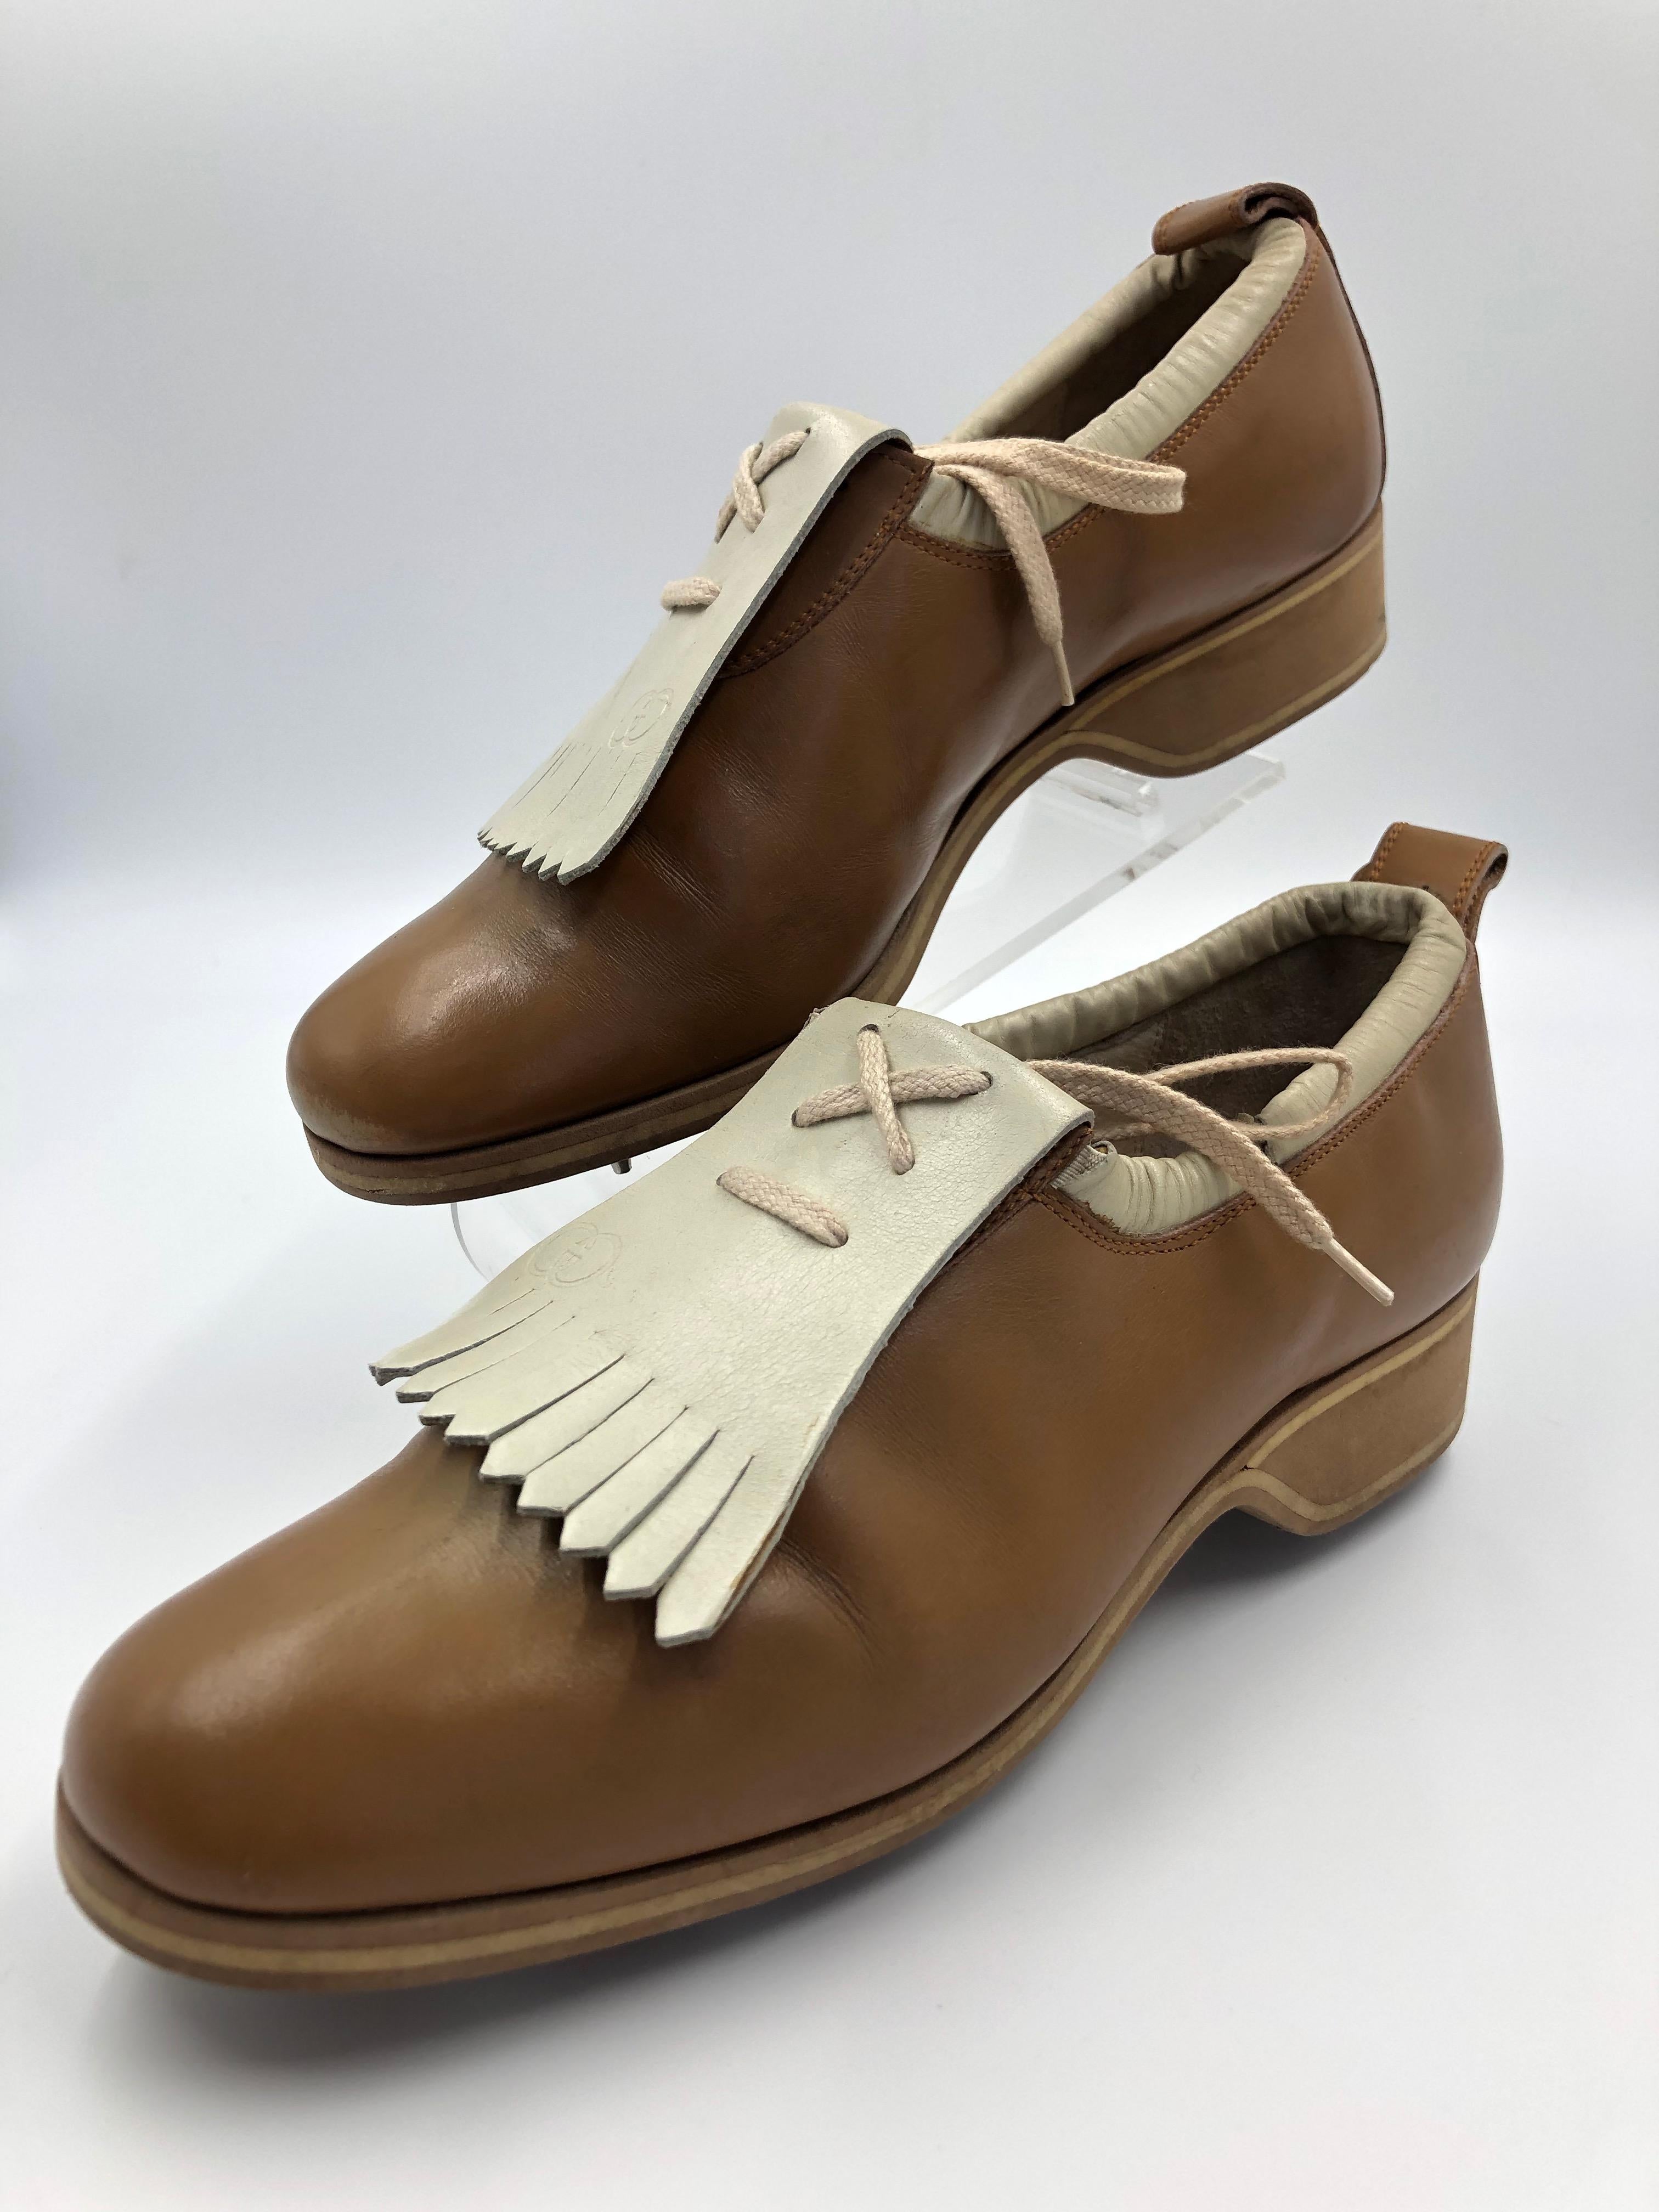 Gucci Collectors Vintage Golf Shoe with Cleats Tan and Cream 5